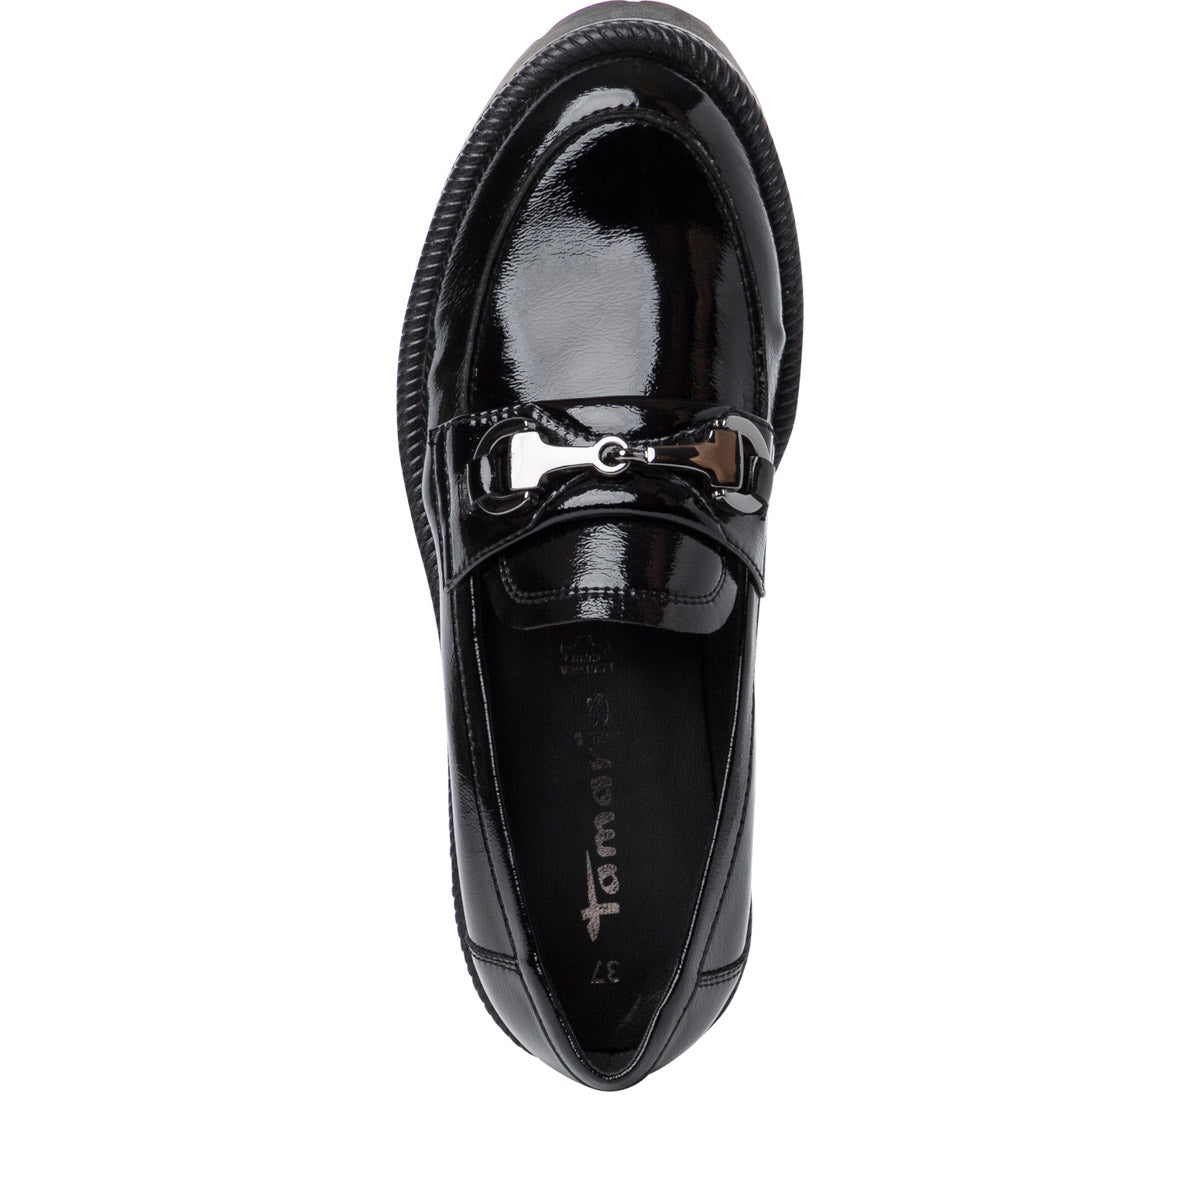 Urban Soles Loafers in Black Patent